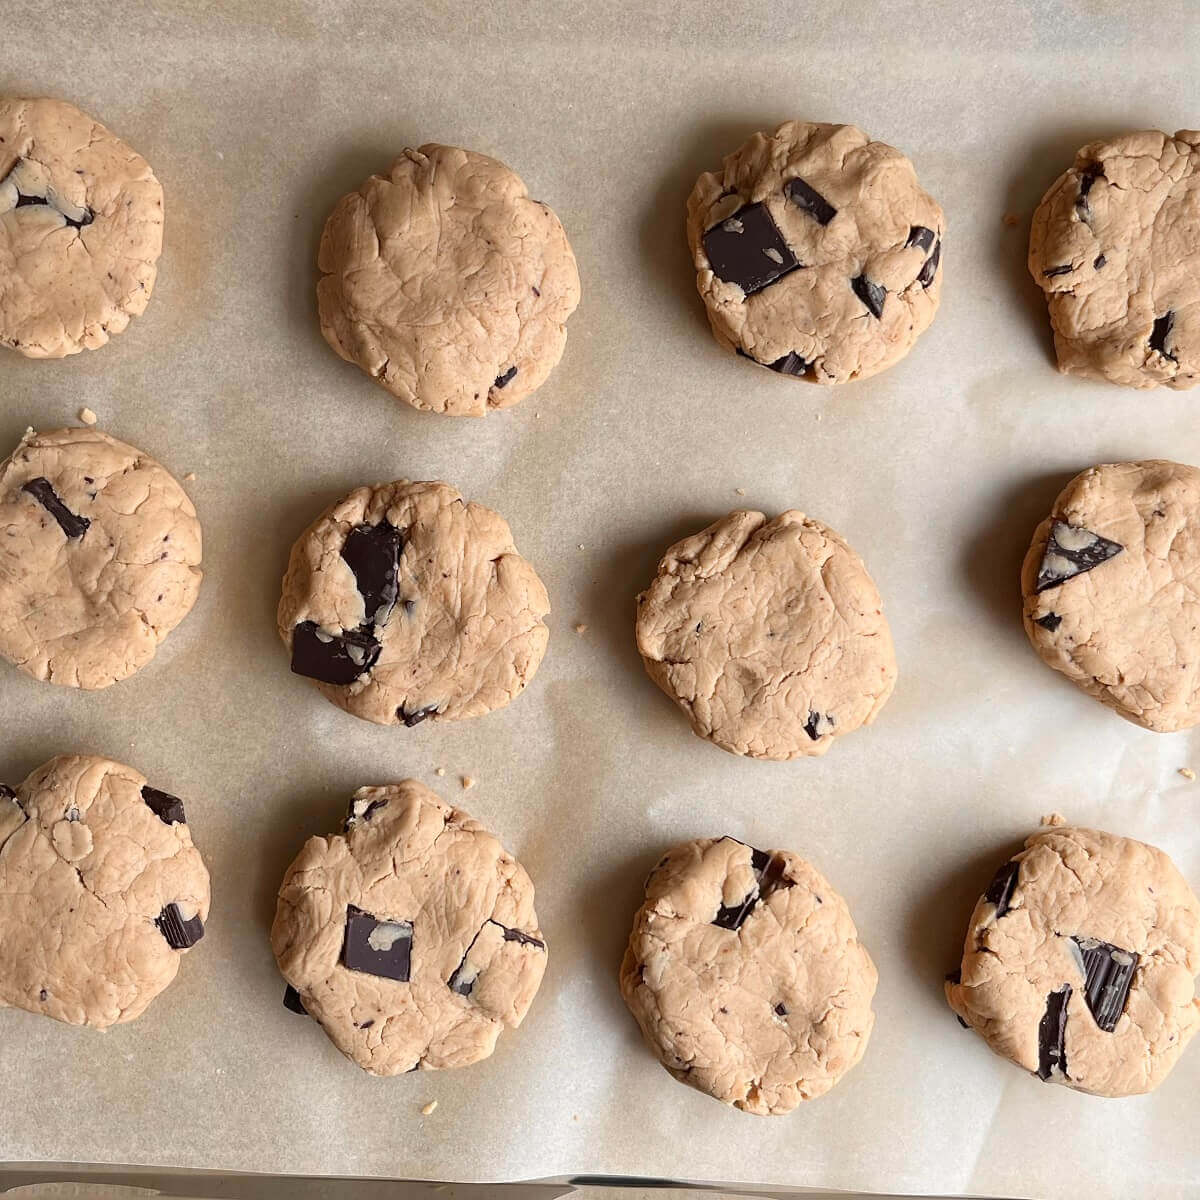 Raw cookies made with pea protein powder on a sheet pan lined with parchment paper.